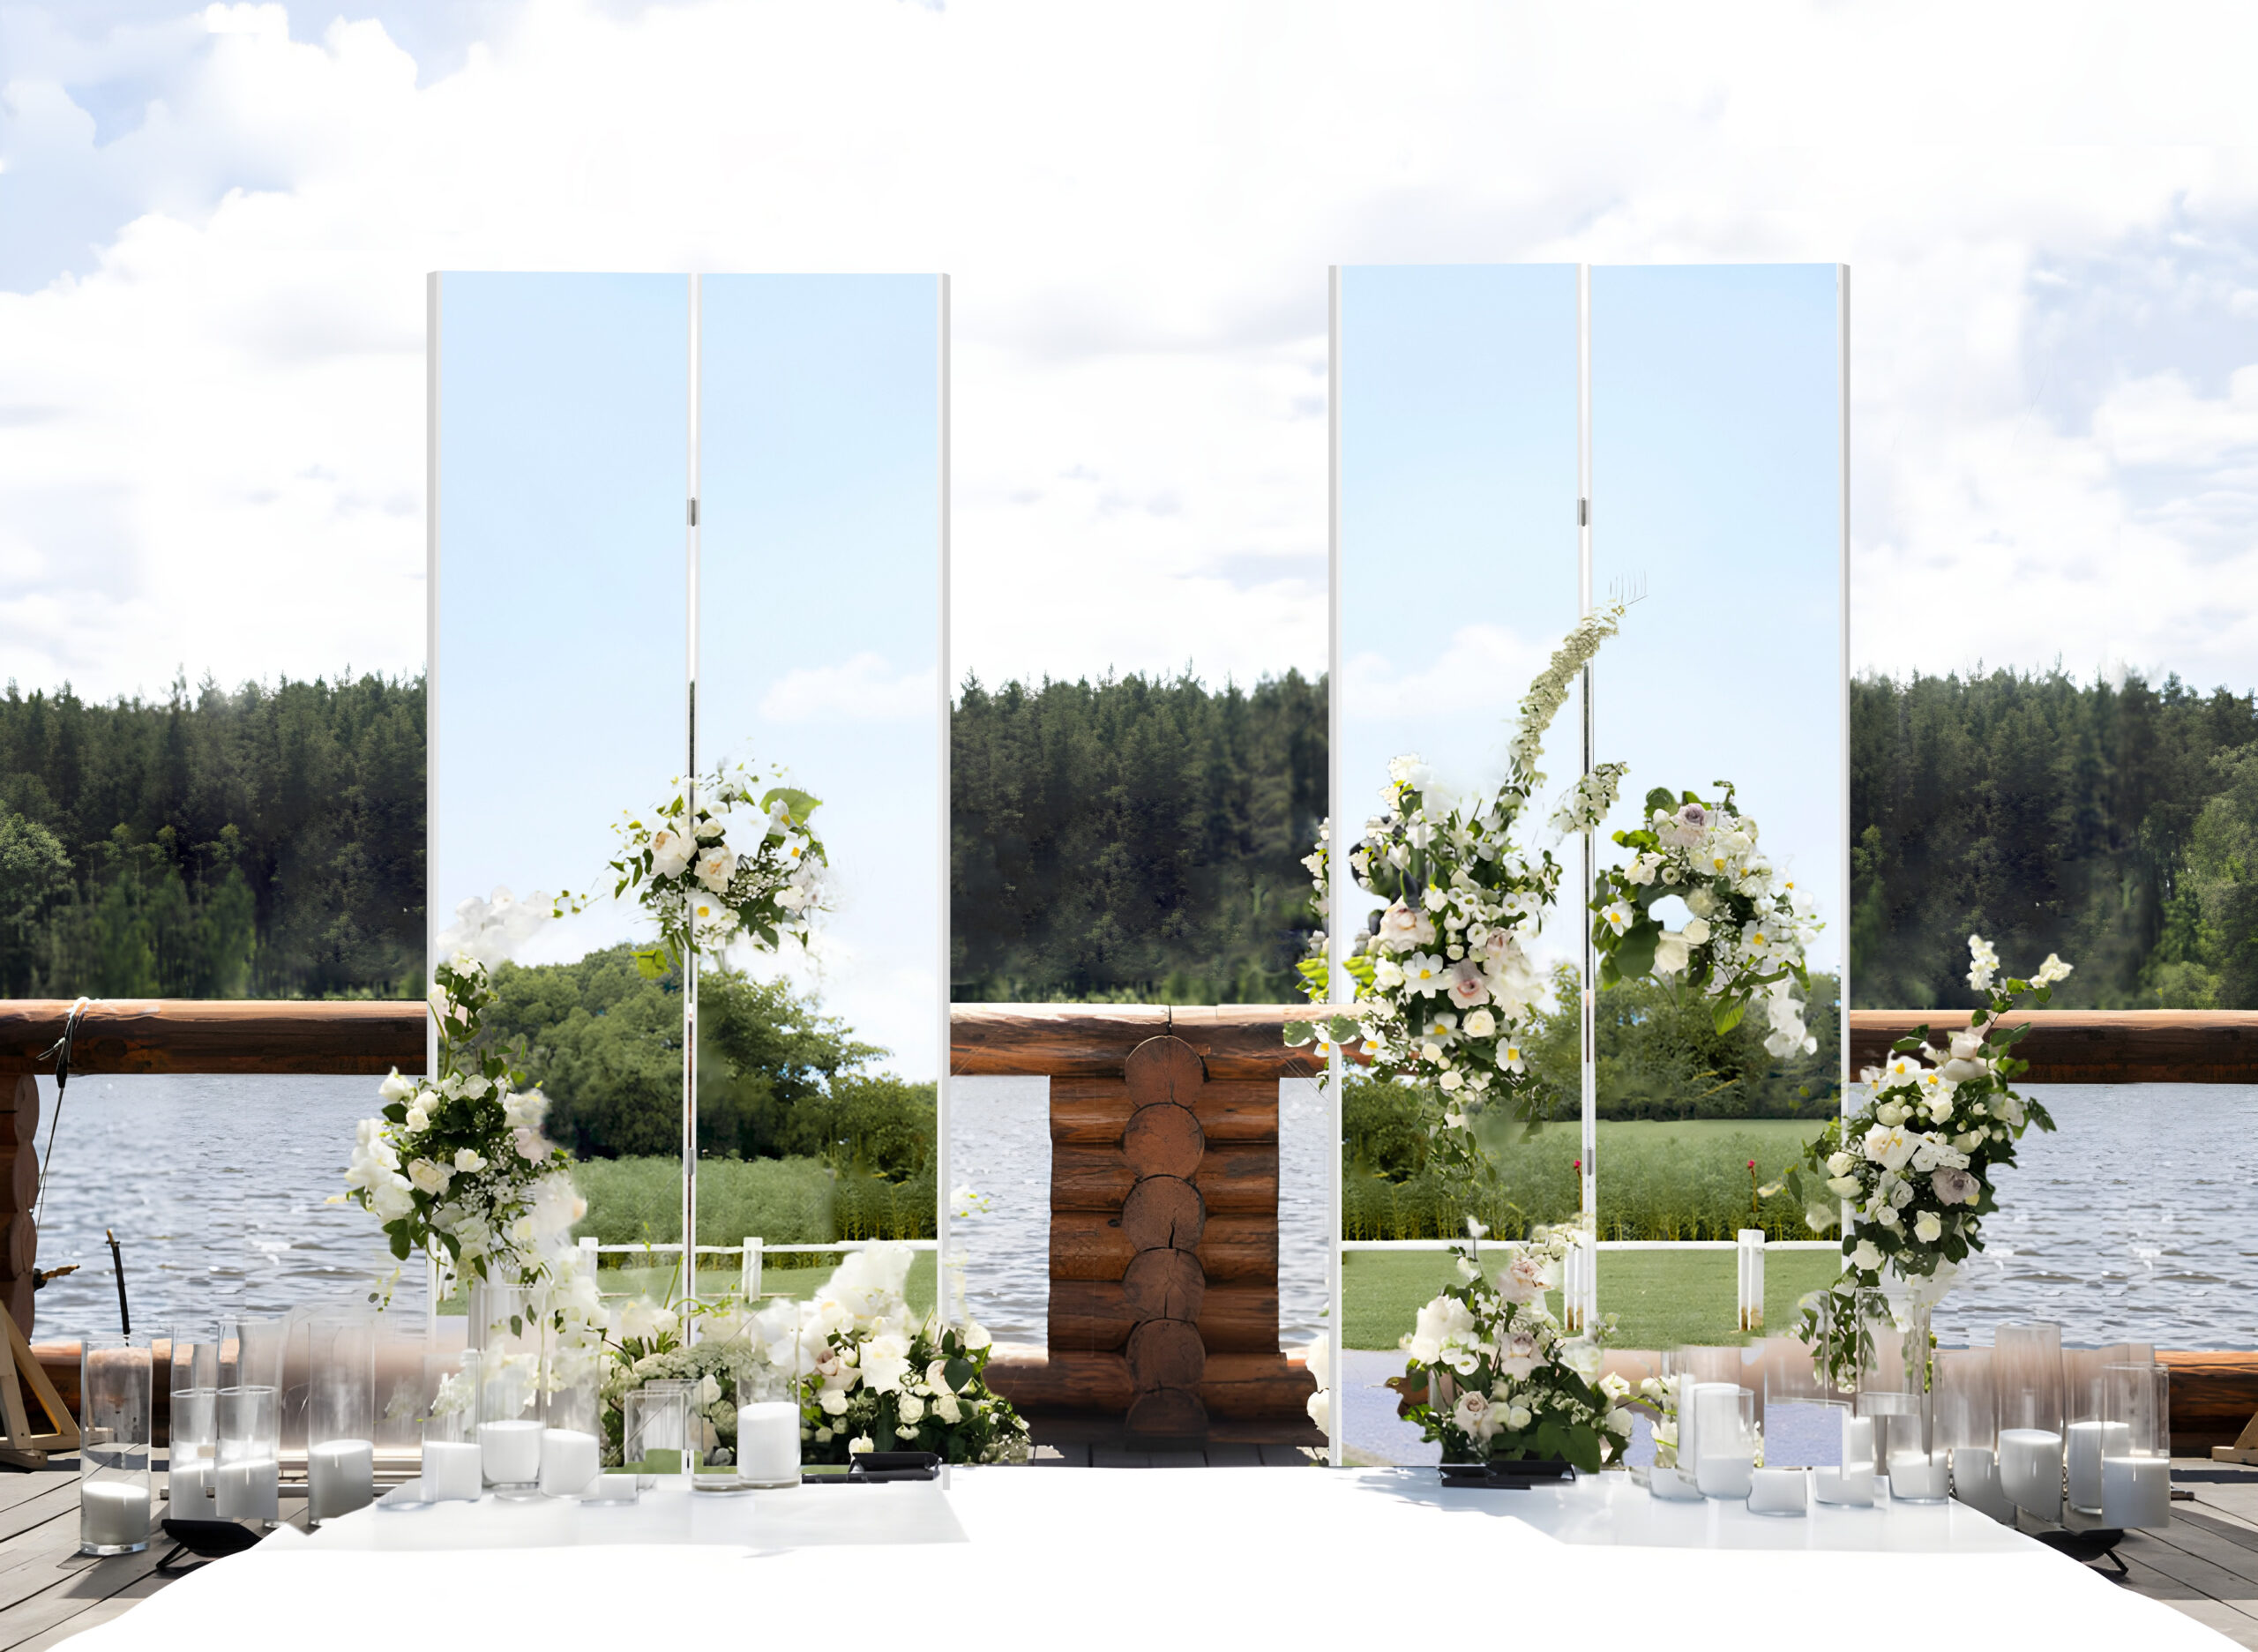 This picture shows foldable brisafe mirrors in a outdoor wedding event
mirror auckland
brisafe mirror auckland
light weight mirror auckland
safe mirror auckland